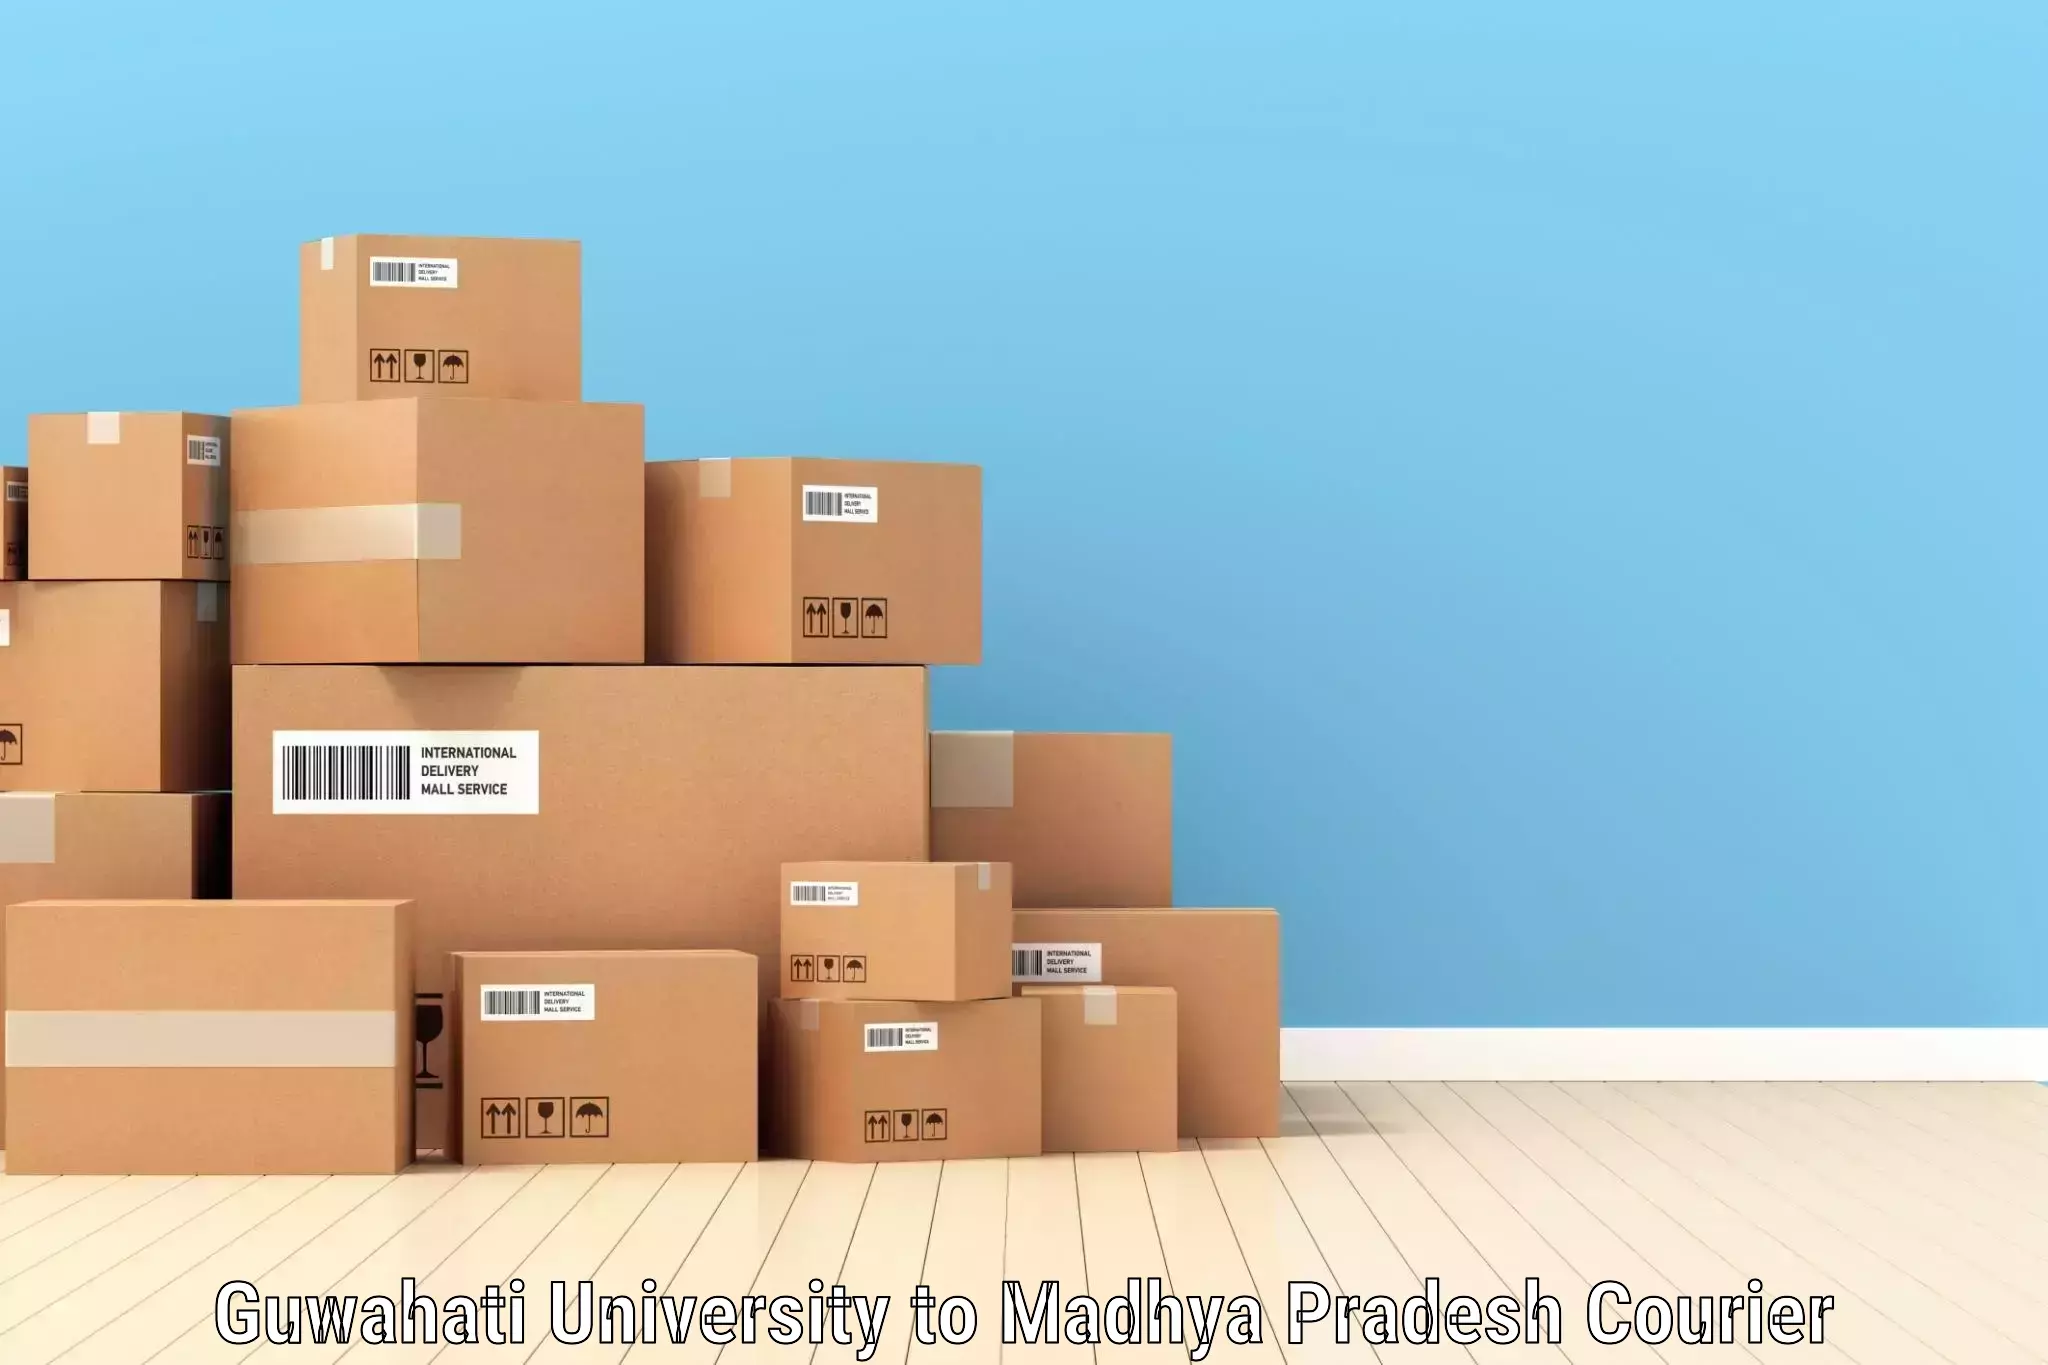 Reliable courier services Guwahati University to Madhya Pradesh